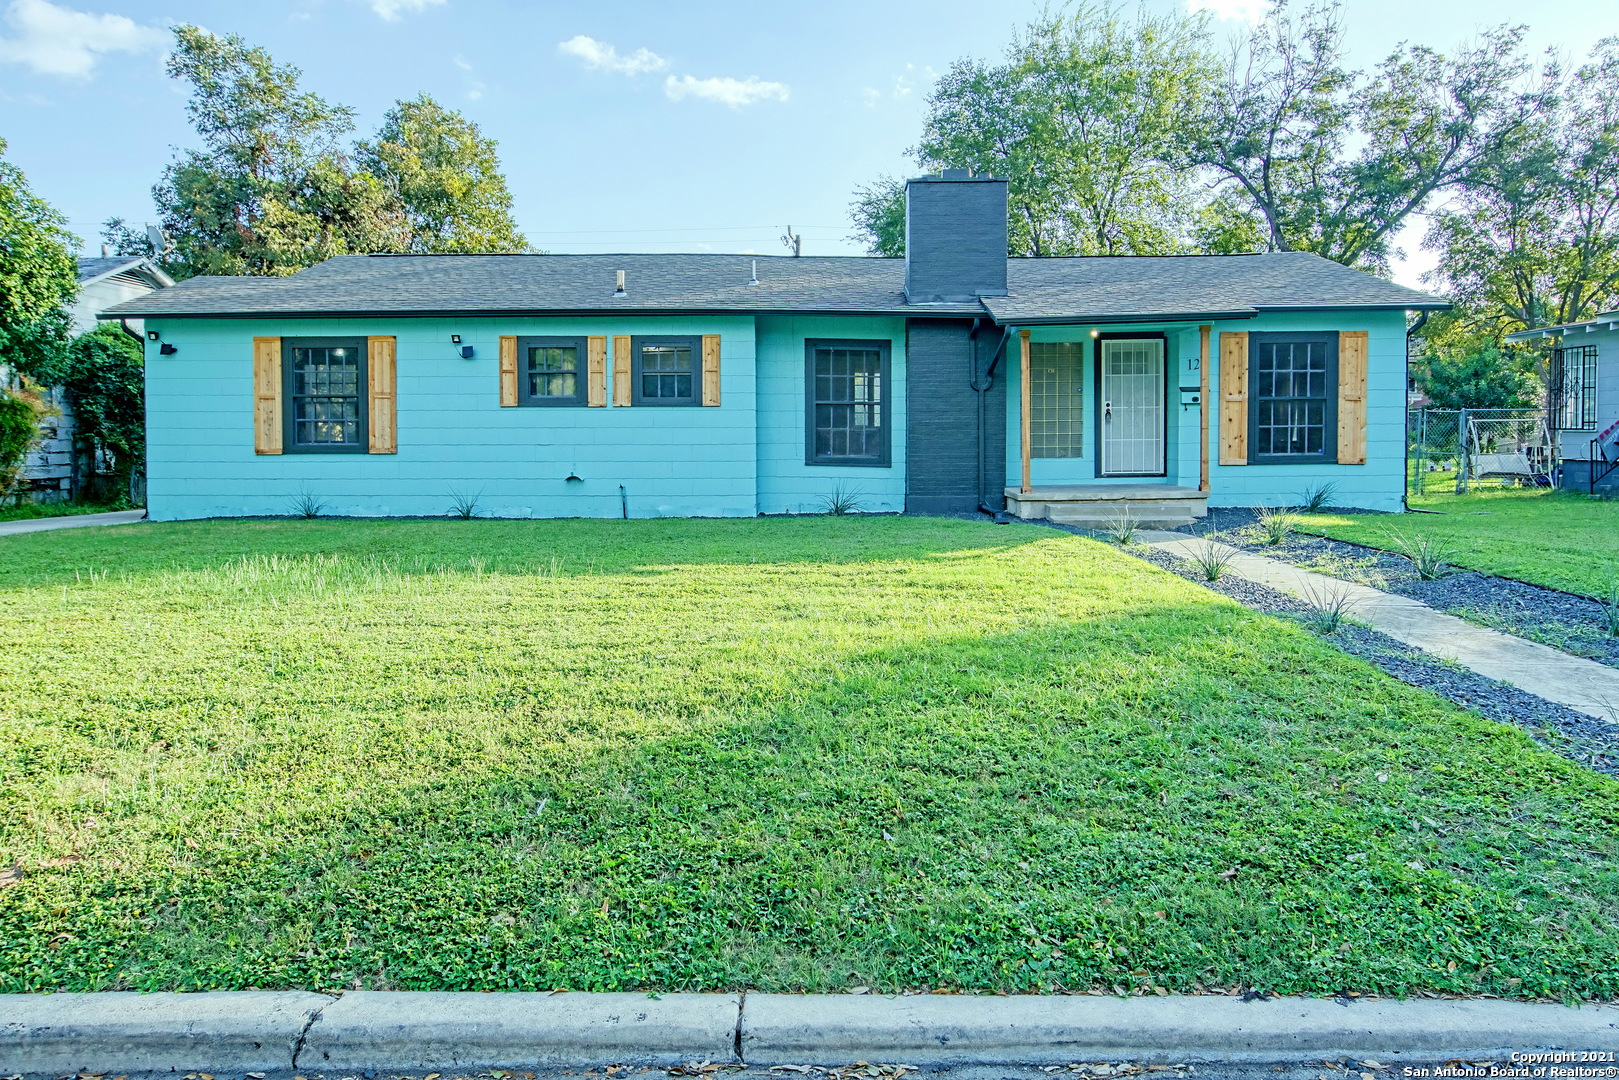 OPEN HOUSE 4/8/22 - 4 PM - 7 PM  REFRESHMENTS INCLUDED!!!    MOTIVATED SELLERS!!!!  Come walk through a classic neighborhood and a tastefully redone home located in the heart of San Antonio. Walking distance from HEB, Jefferson Bodega, and Art Deco District!  Owners have spared no expense on this spacious 3 bedroom 2 bath house with open living/dining/kitchen/formal space concept. Brand new water heater!  HVAC is only 5 years old!  All new electricity and updated plumbing.  Brand new attic insulation!  Spacious backyard, and a detached garage.  Original hardwood floors throughout home.  MUST SEE!!